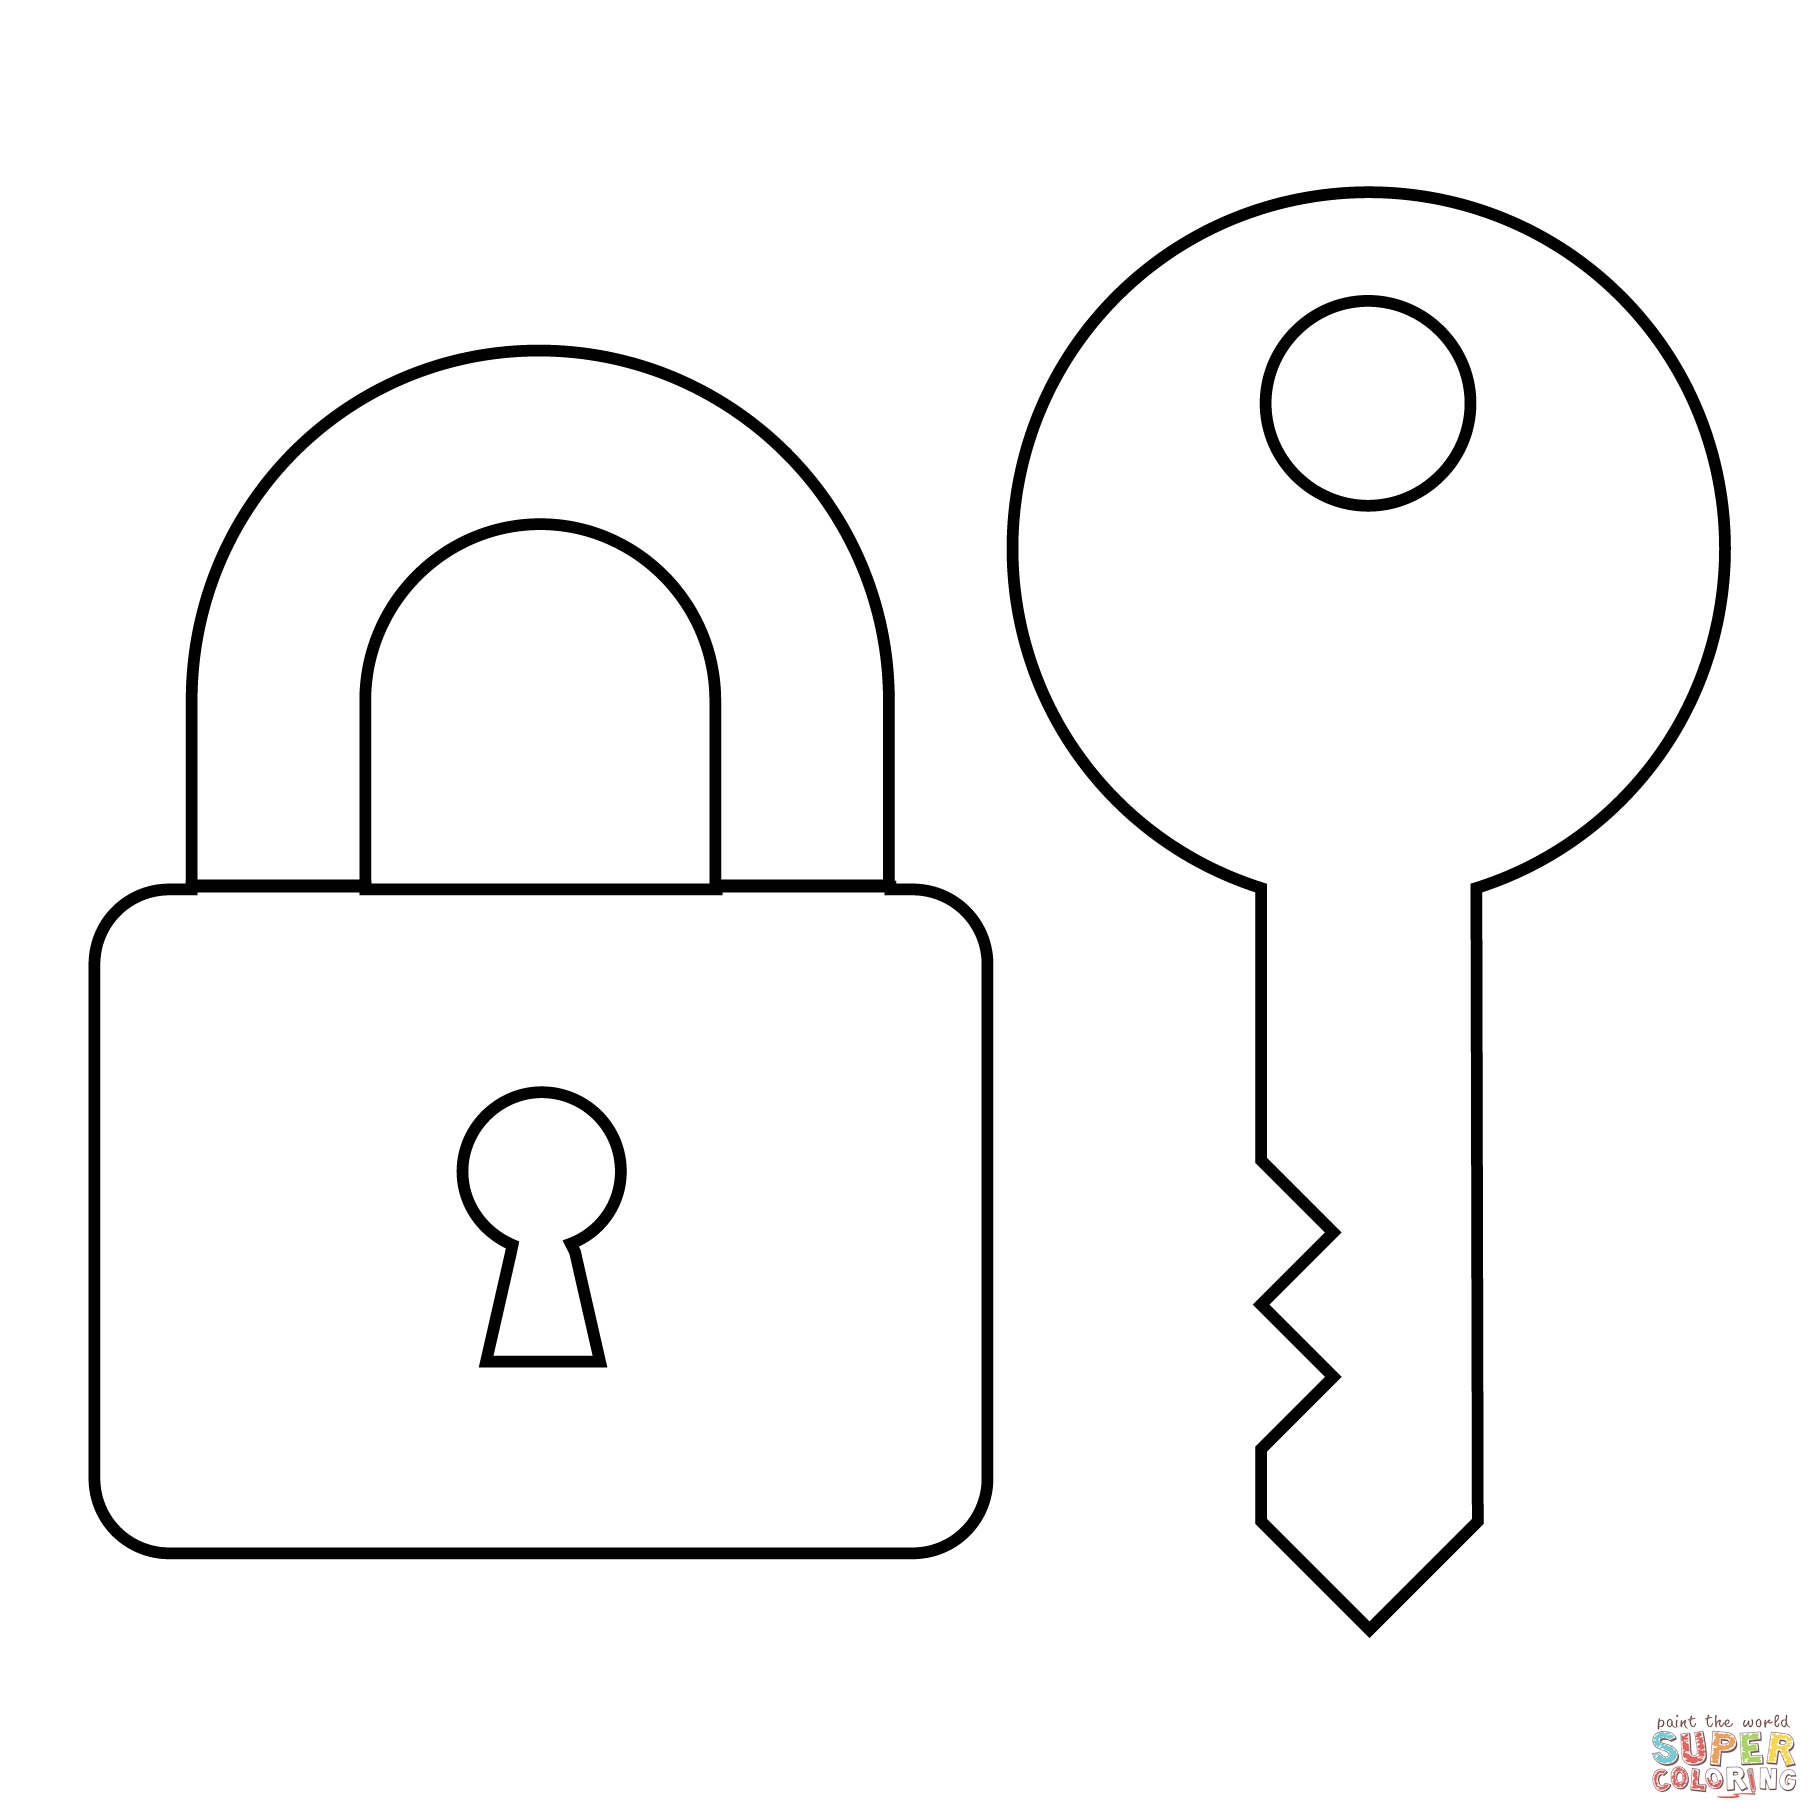 Locked with key emoji coloring page free printable coloring pages